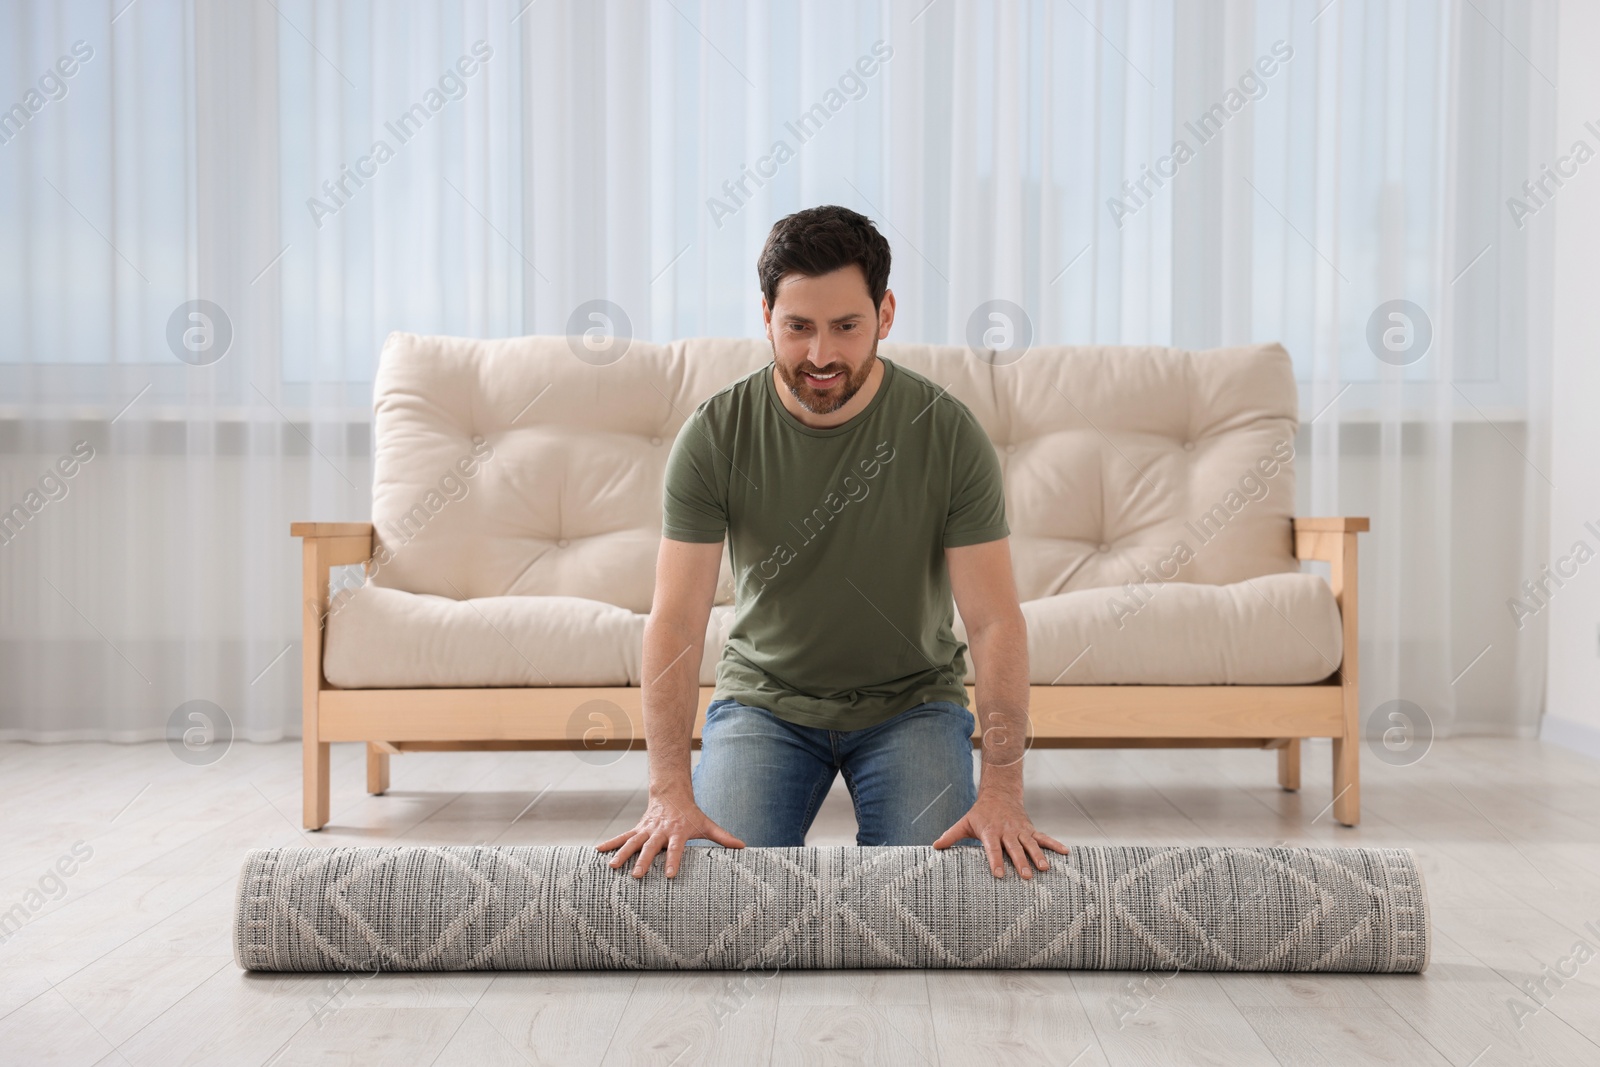 Photo of Smiling man unrolling carpet with beautiful pattern on floor in room